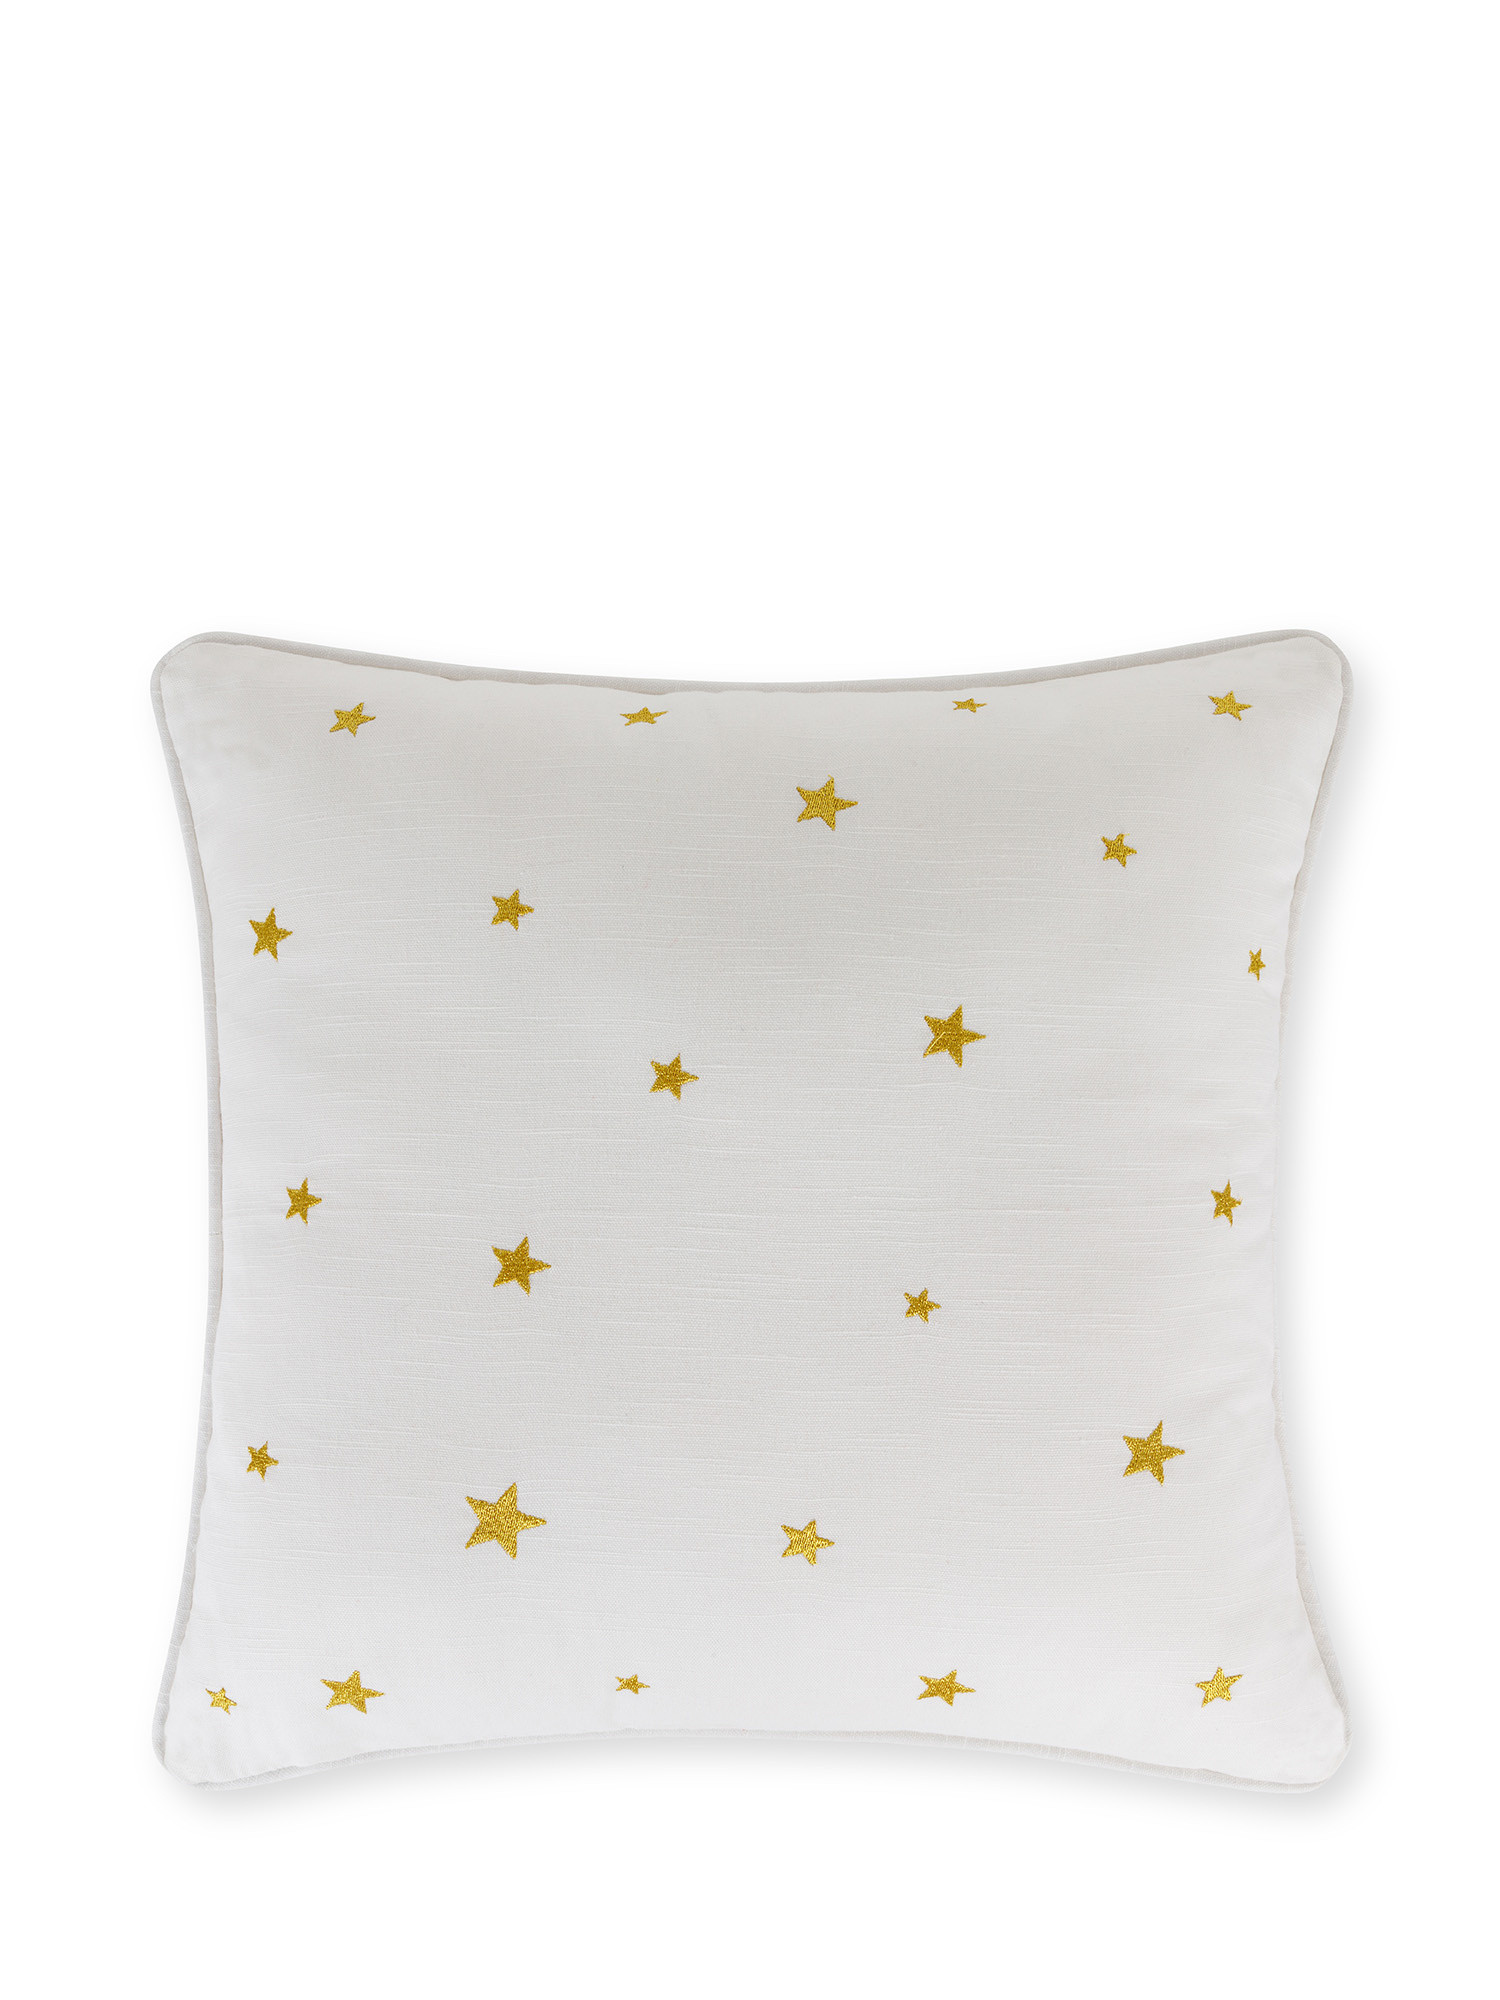 Cuscino in velluto con stelle ricamate in filo lurex 45x45 cm, Oro, large image number 0